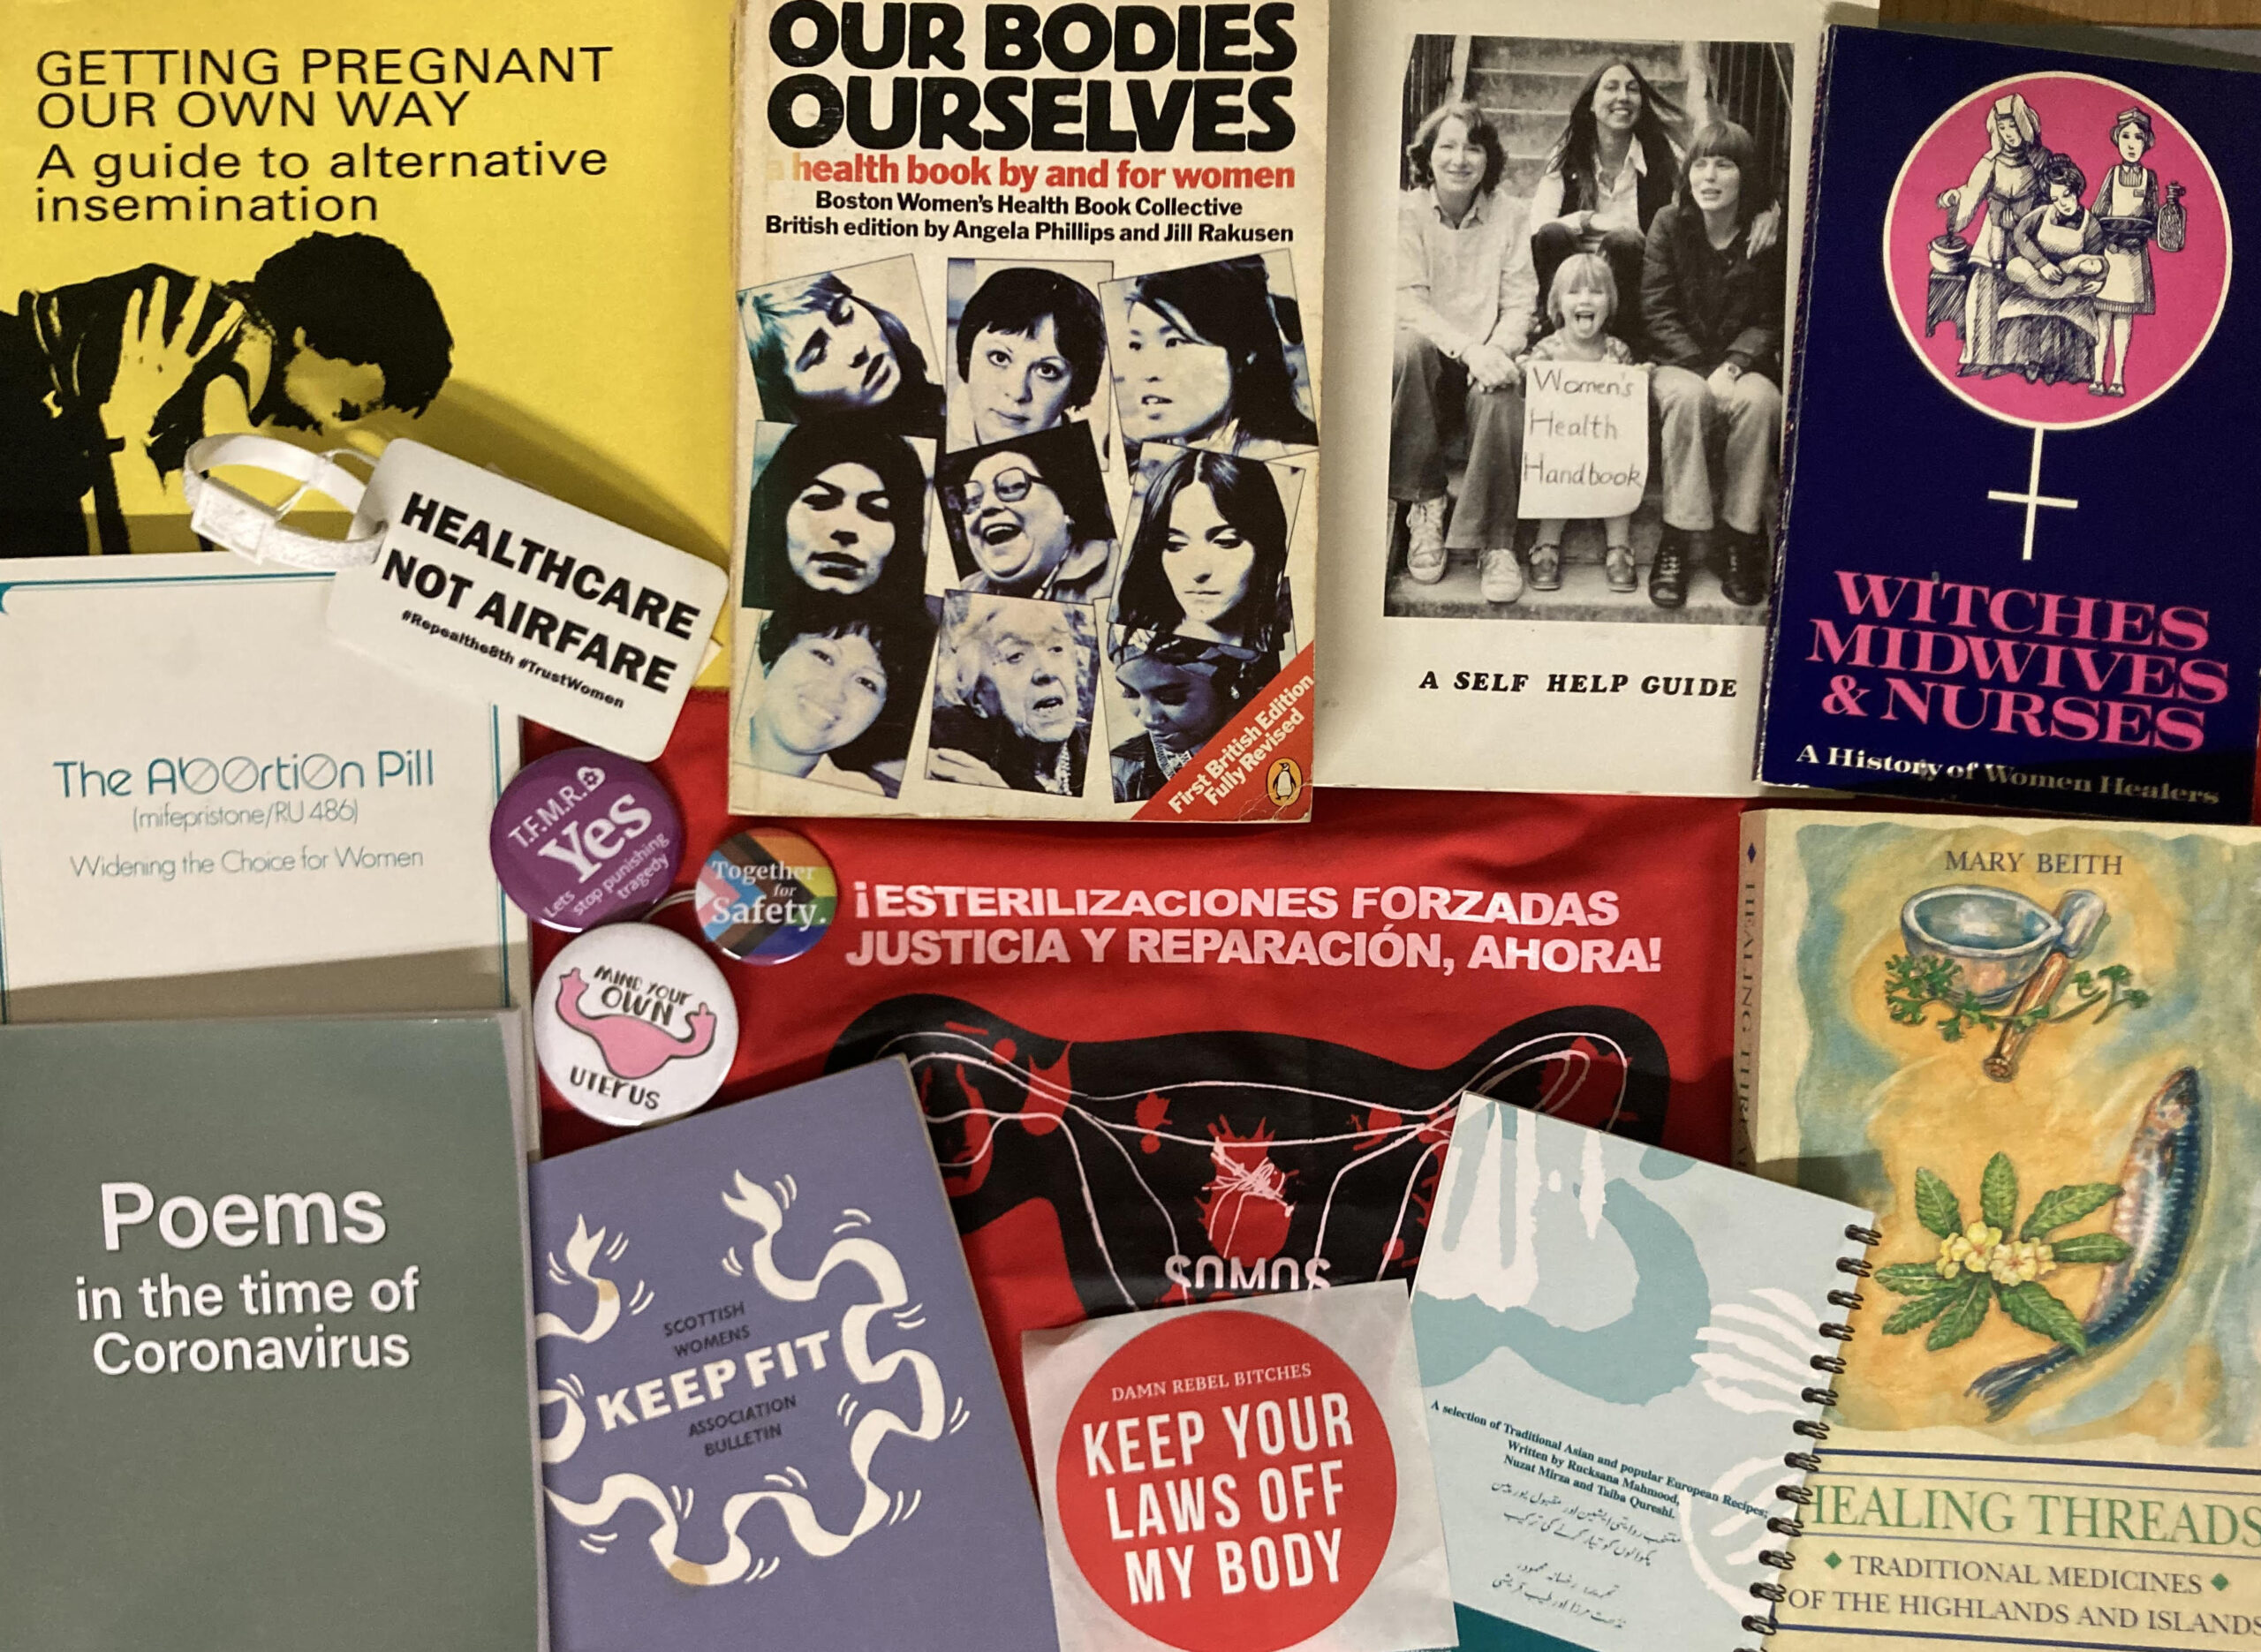 A photo of different materials from Glasgow Women's Library's collections on women's health and wellbeing, laid flat on a table.